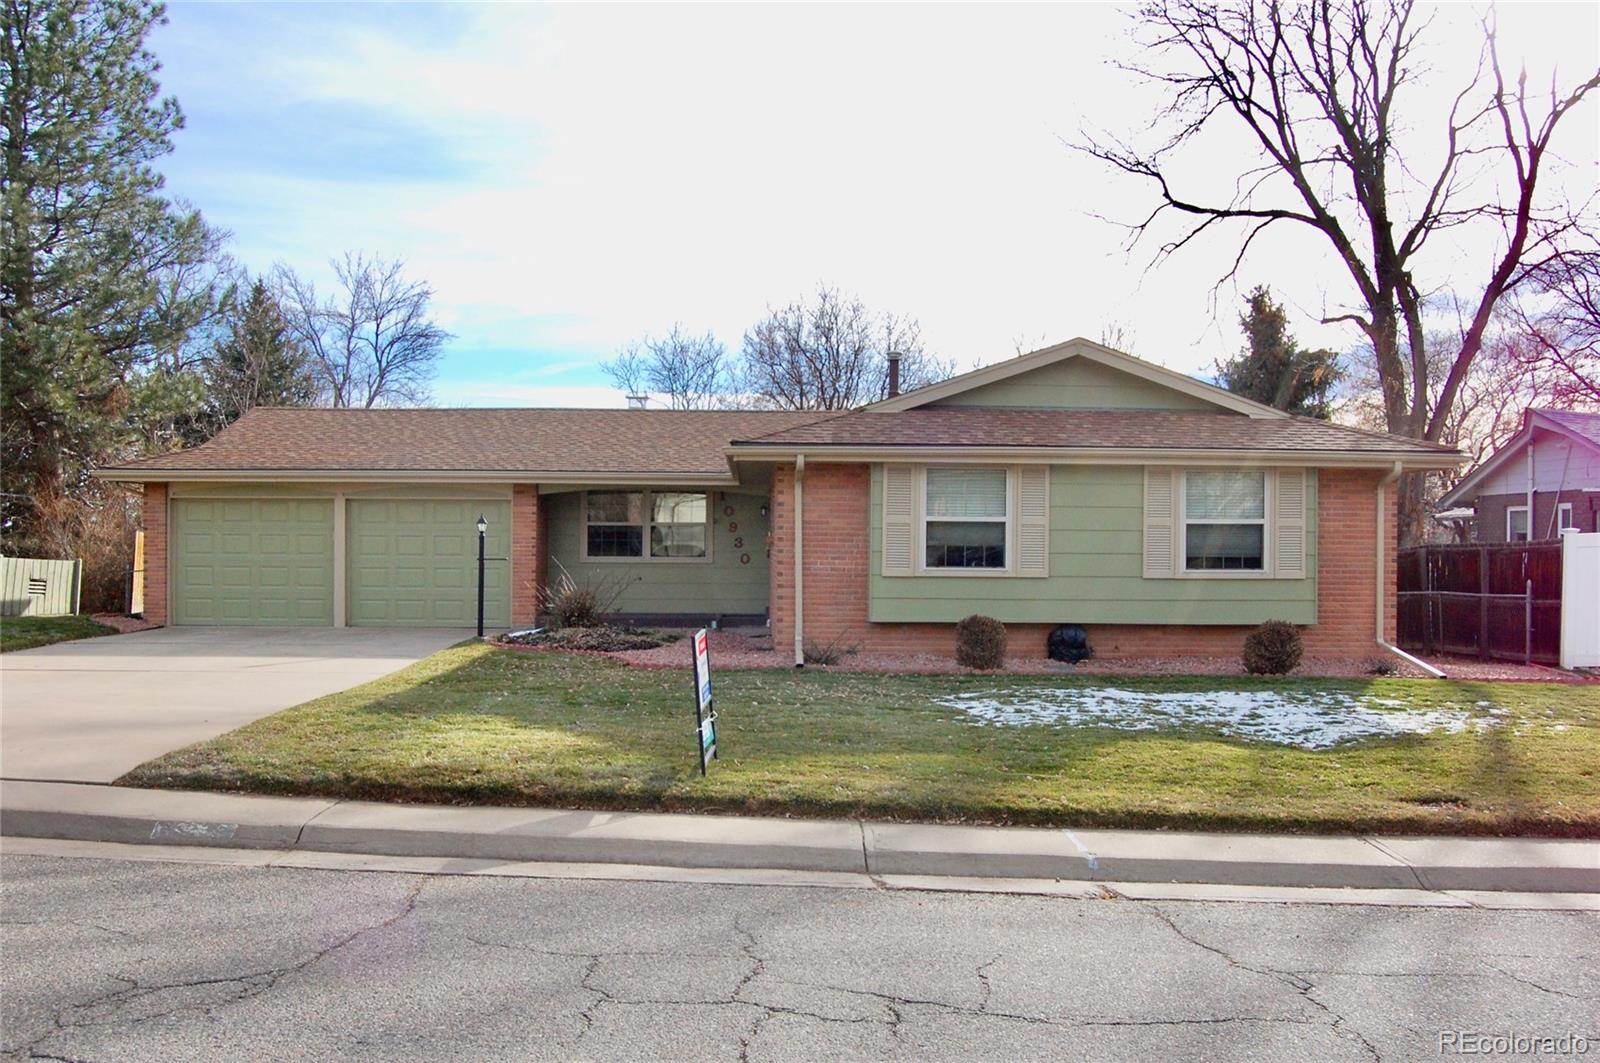 10930 W 71st Place, arvada MLS: 4191659 Beds: 4 Baths: 3 Price: $660,000